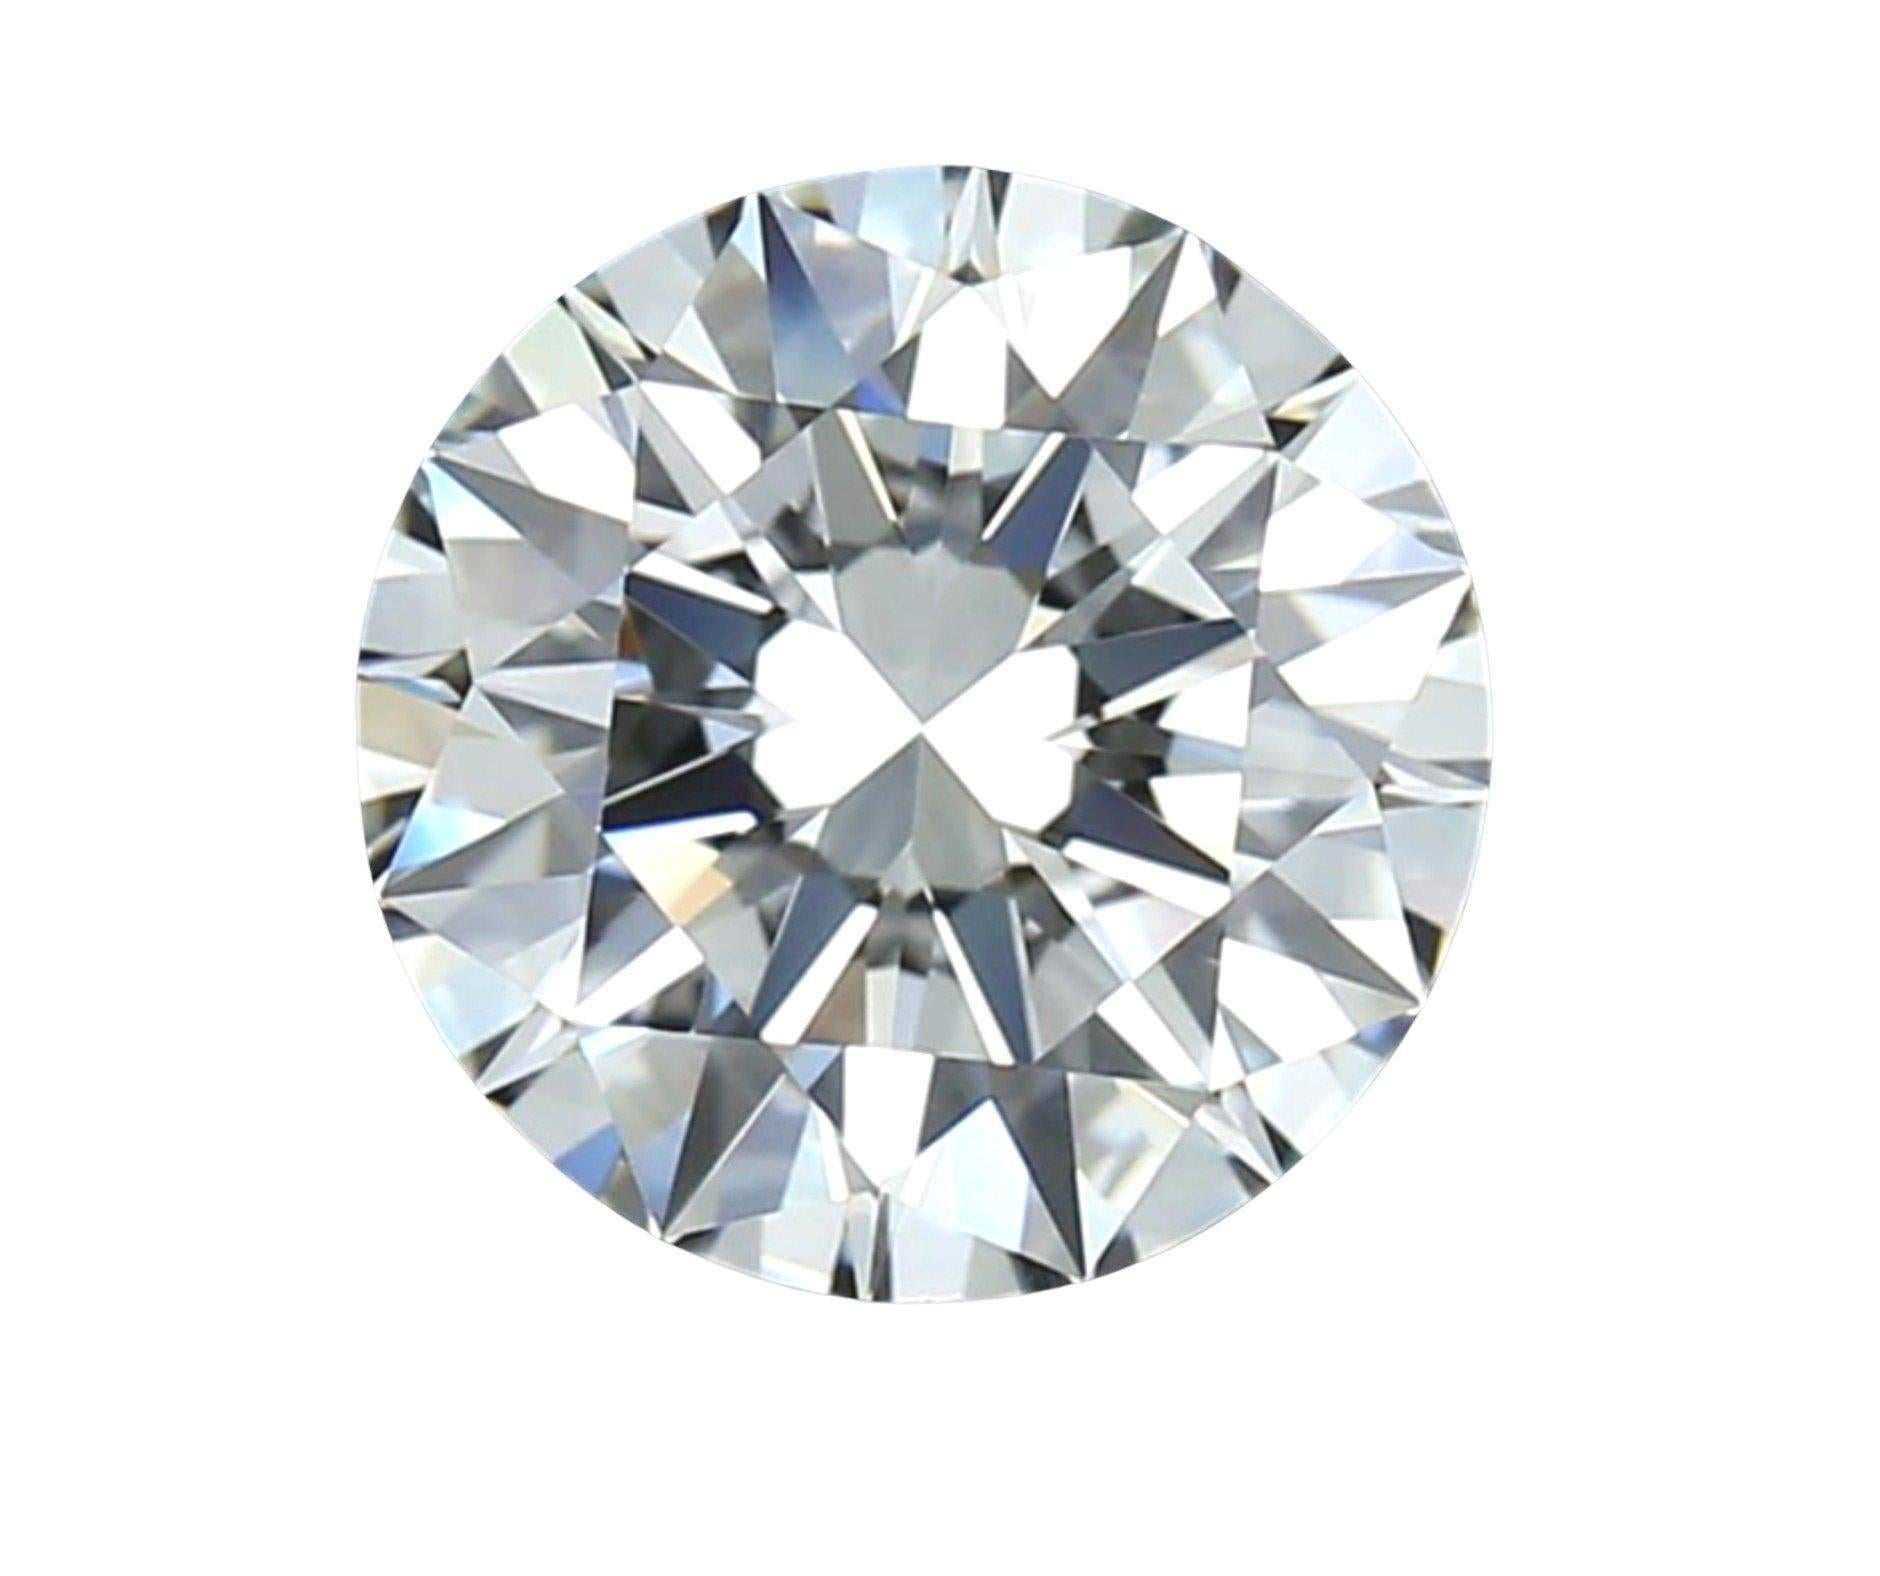 Dazzling 1 pc Natural Diamond 1.03 ct Round I VVS1 GIA Certificate For Sale 1